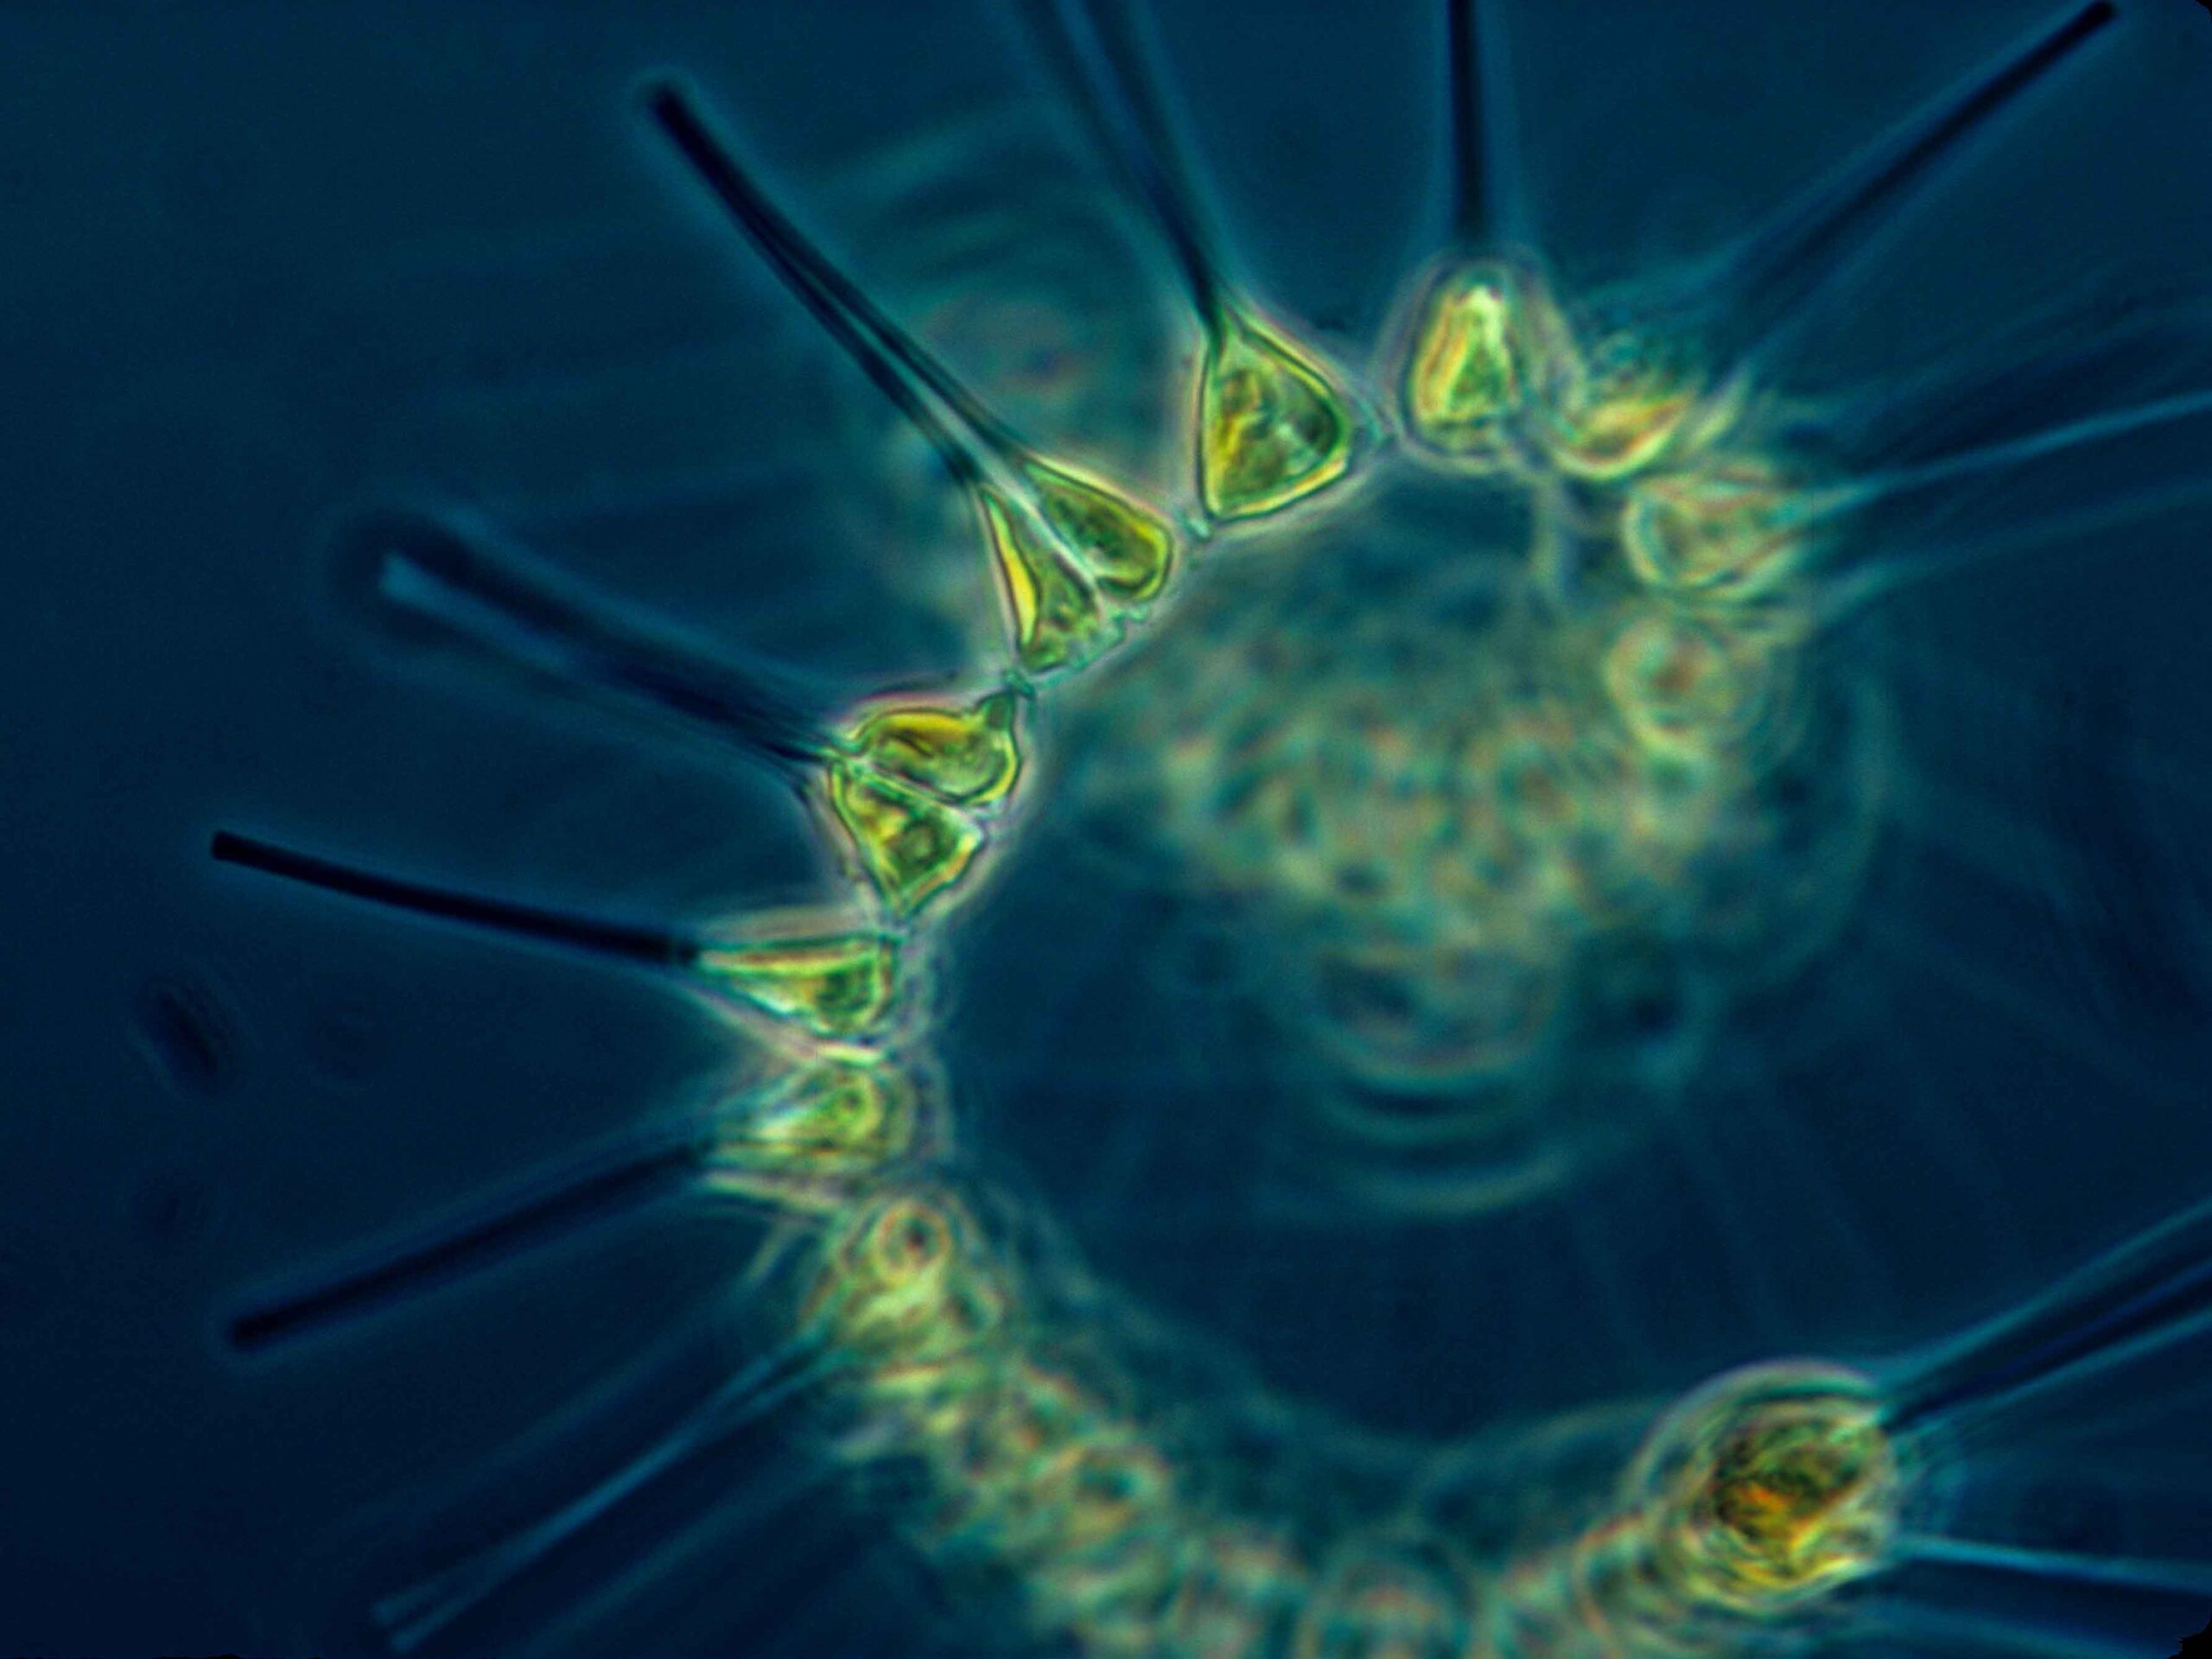 A coil image of Phytoplankton seen through a microscope